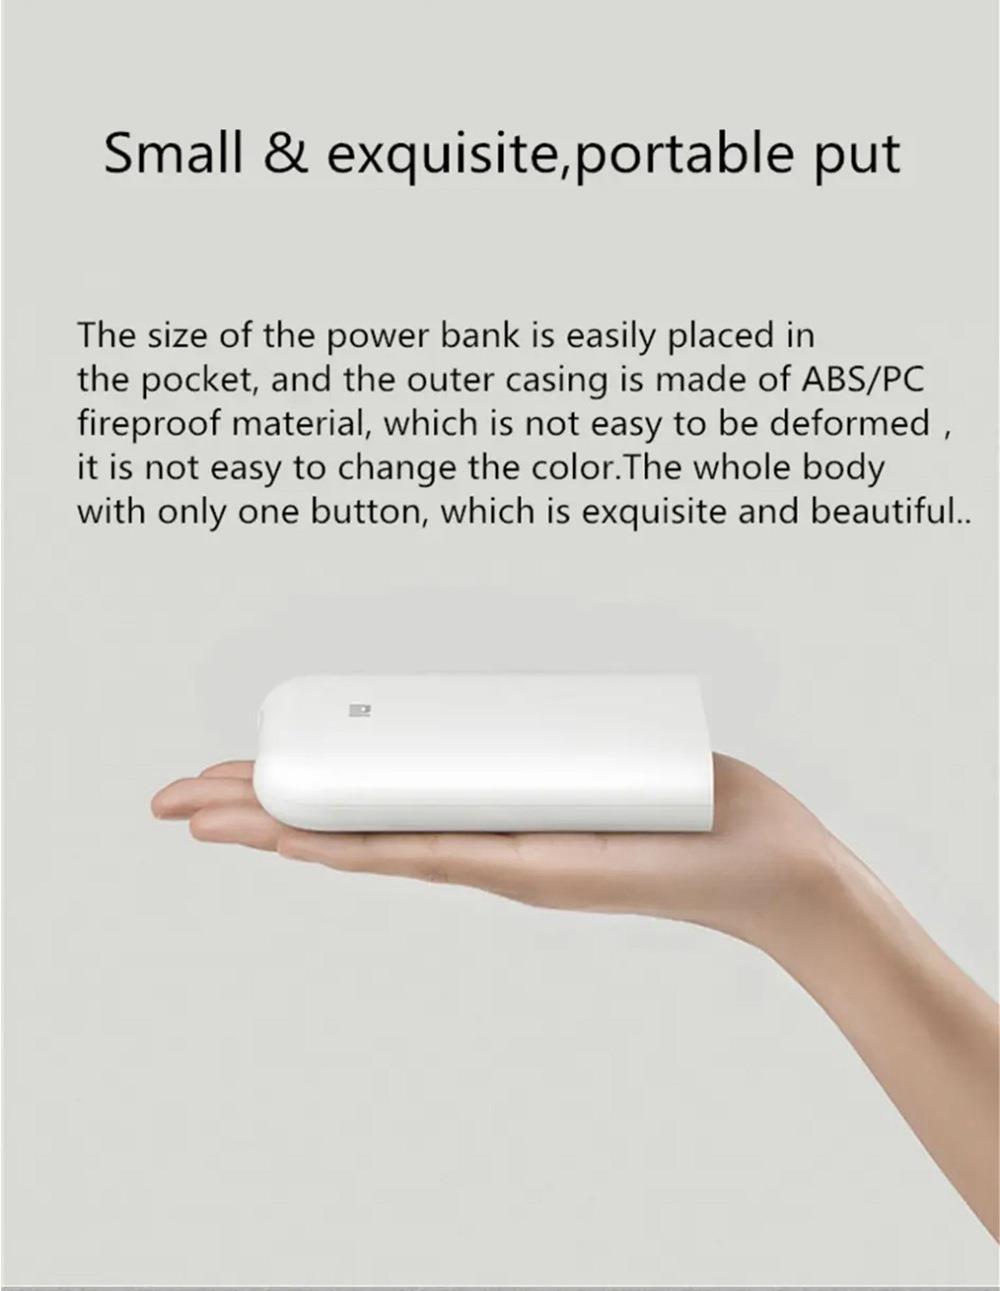 Xiaomi Pocket Photo Printer 3 Inch 300 DPI AR ZINK Non-ink Technology Portable Picture Printer APP Bluetooth Connection-White